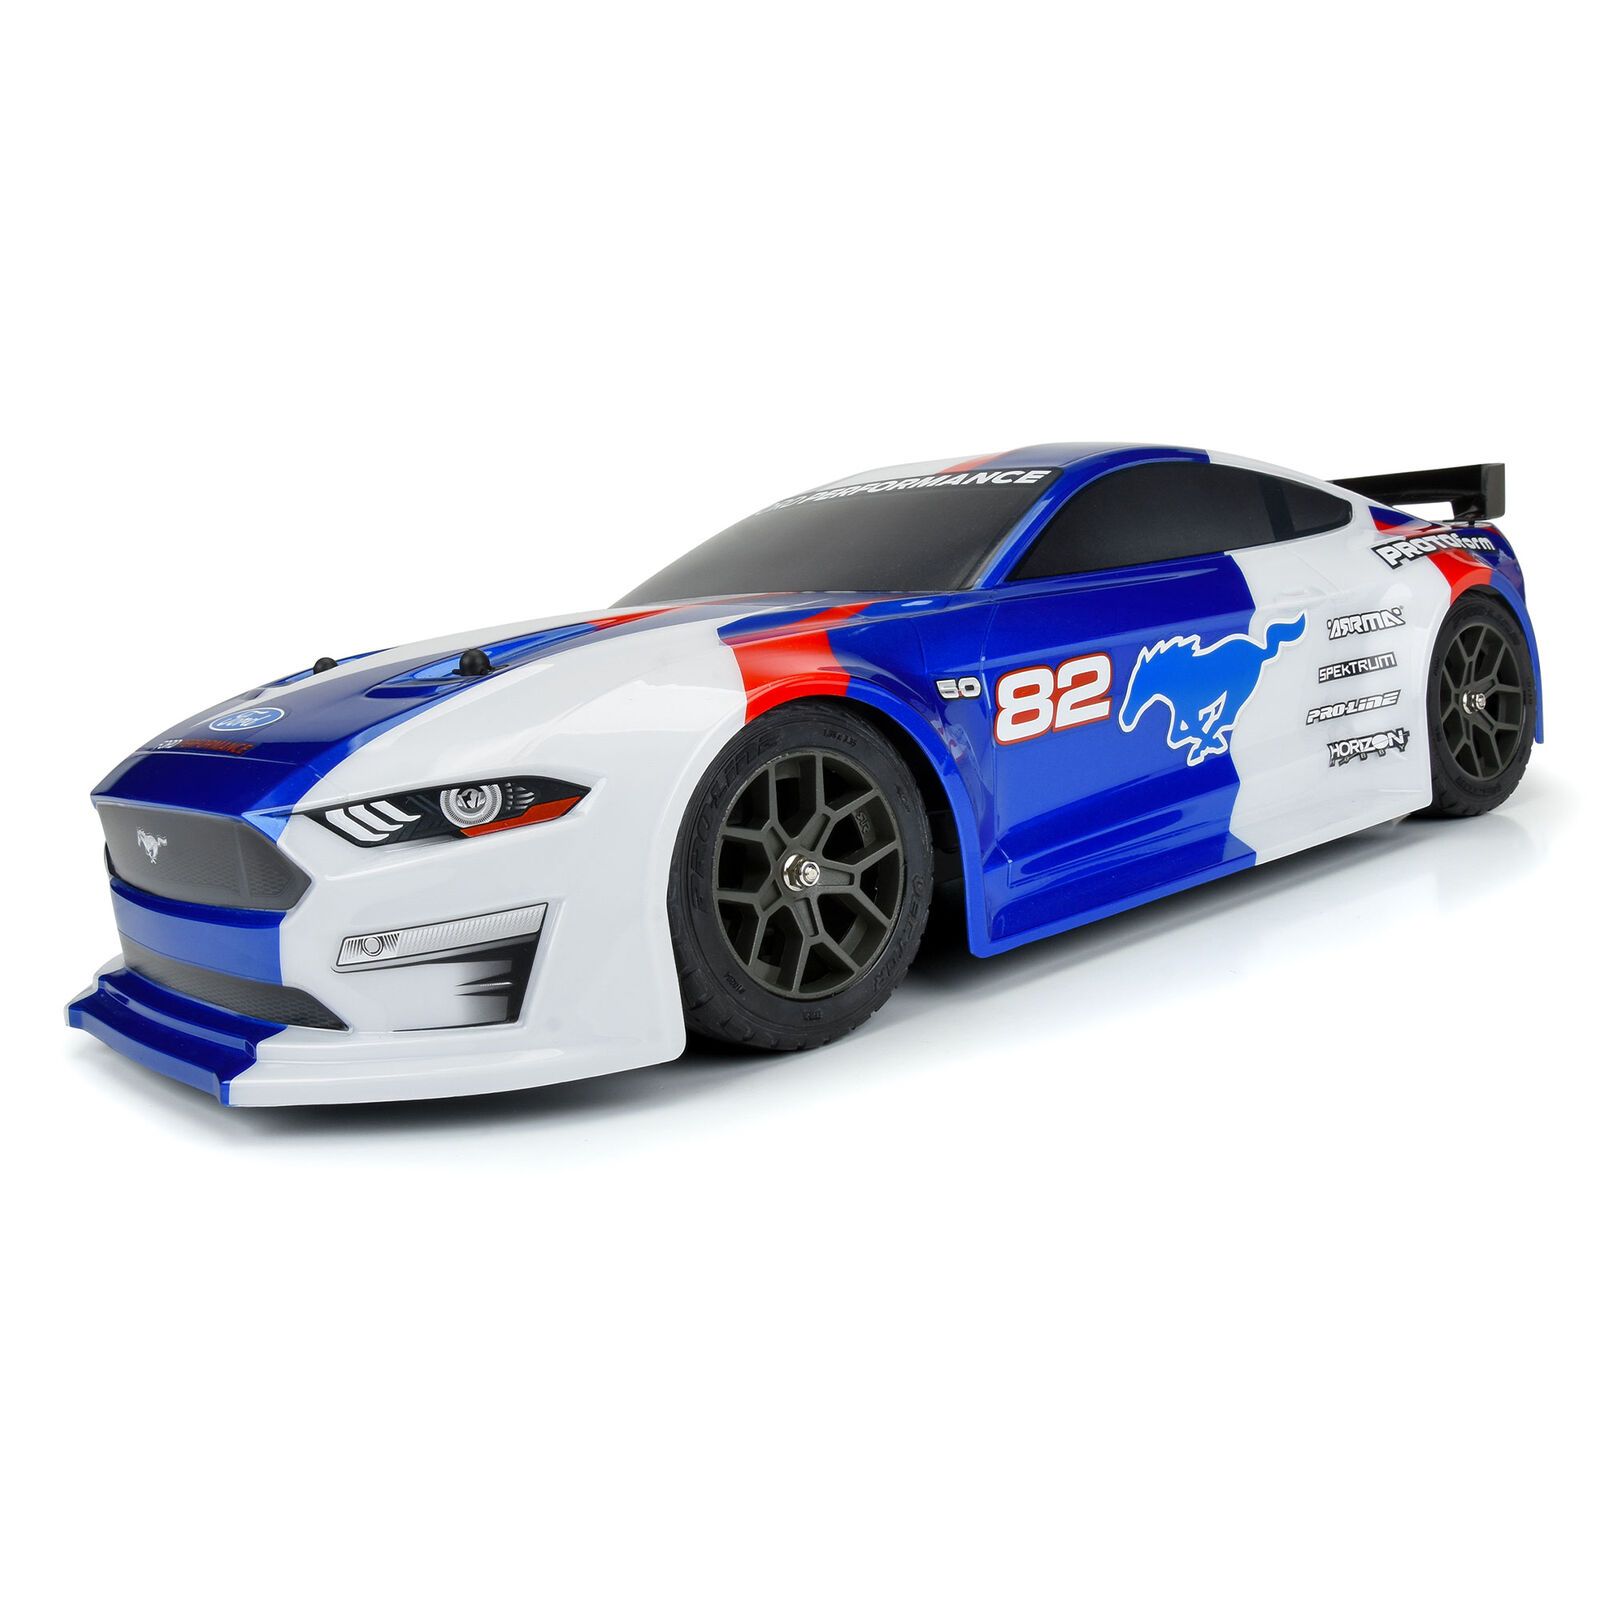 PROTOform - Pro-line Mustang | Infraction Vendetta Body 1/8 (Blue): Racing Pro-Line 3S Ford & Painted 2021